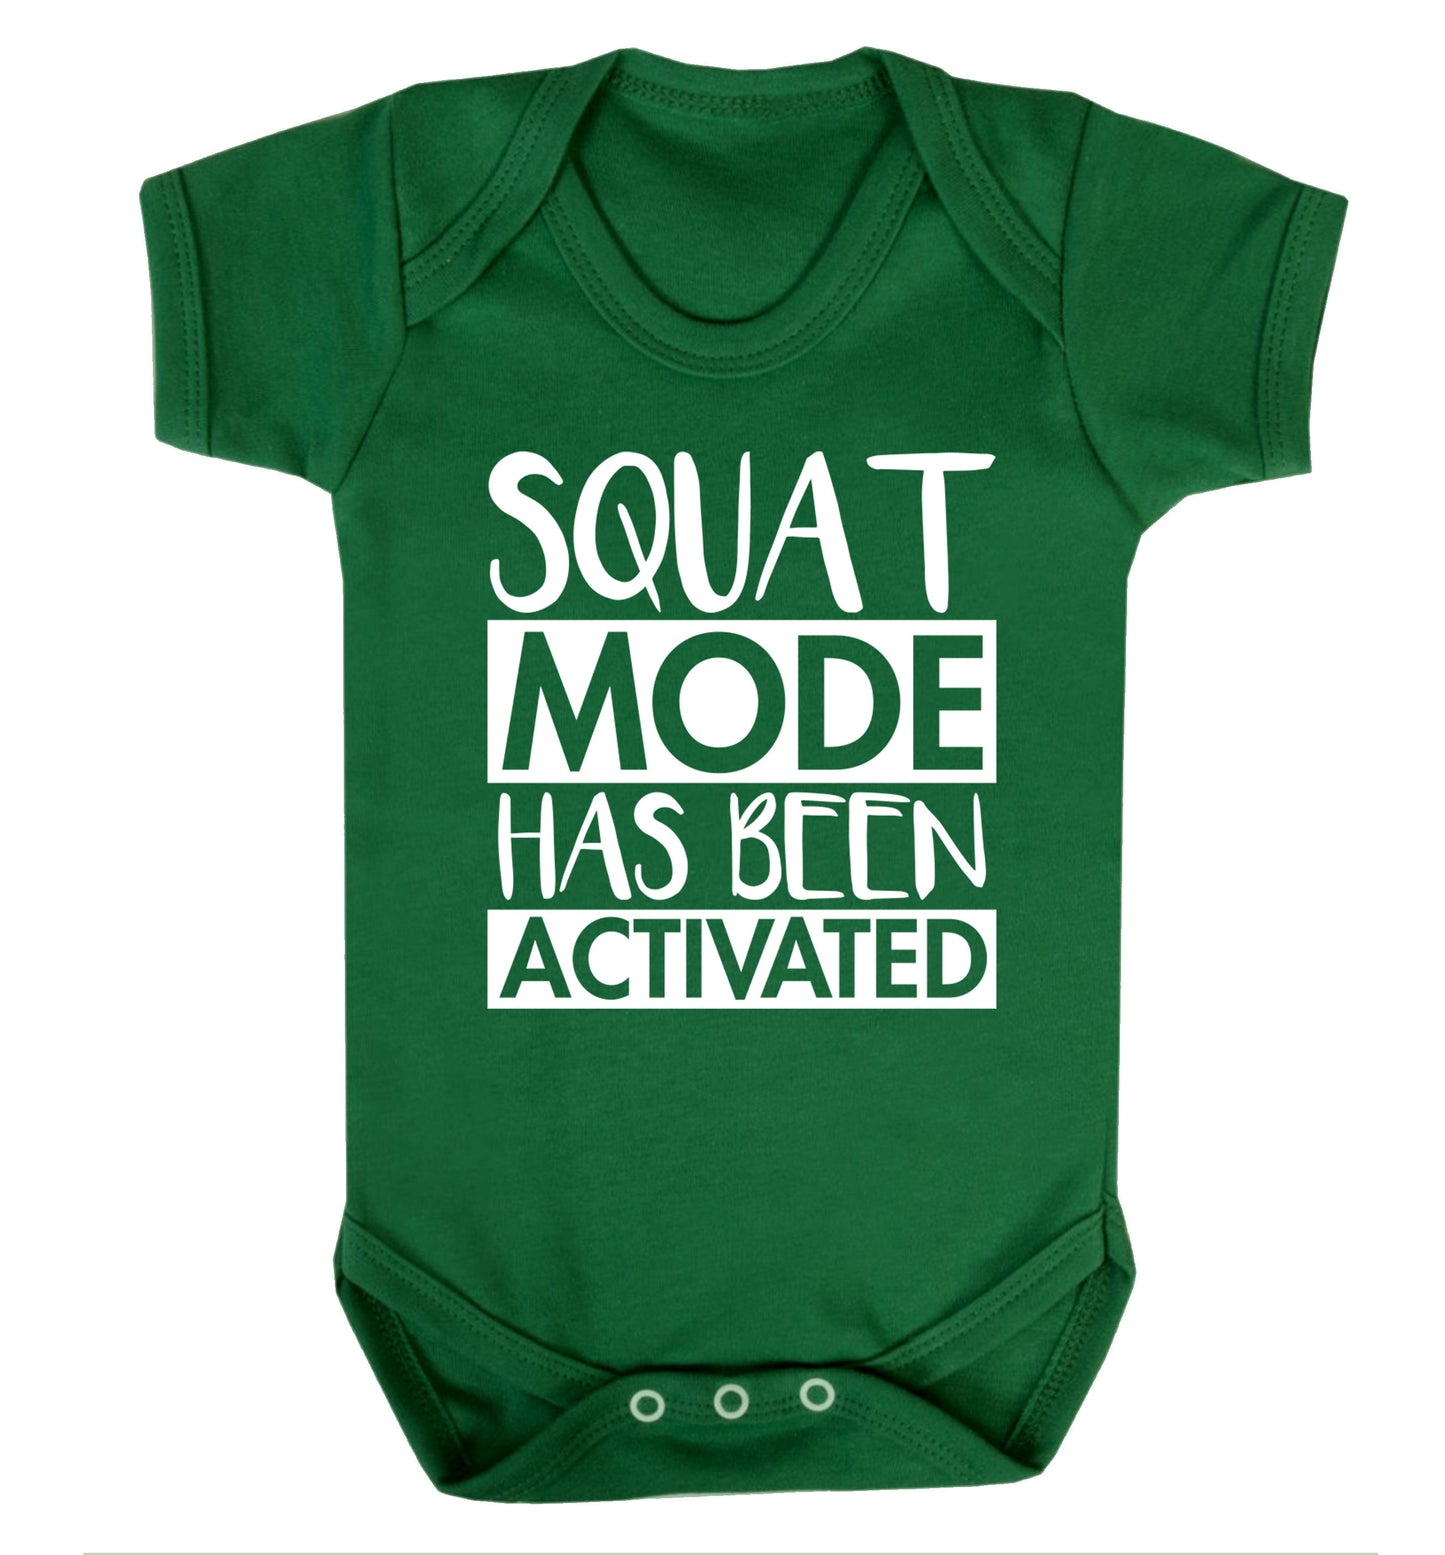 Squat mode activated Baby Vest green 18-24 months